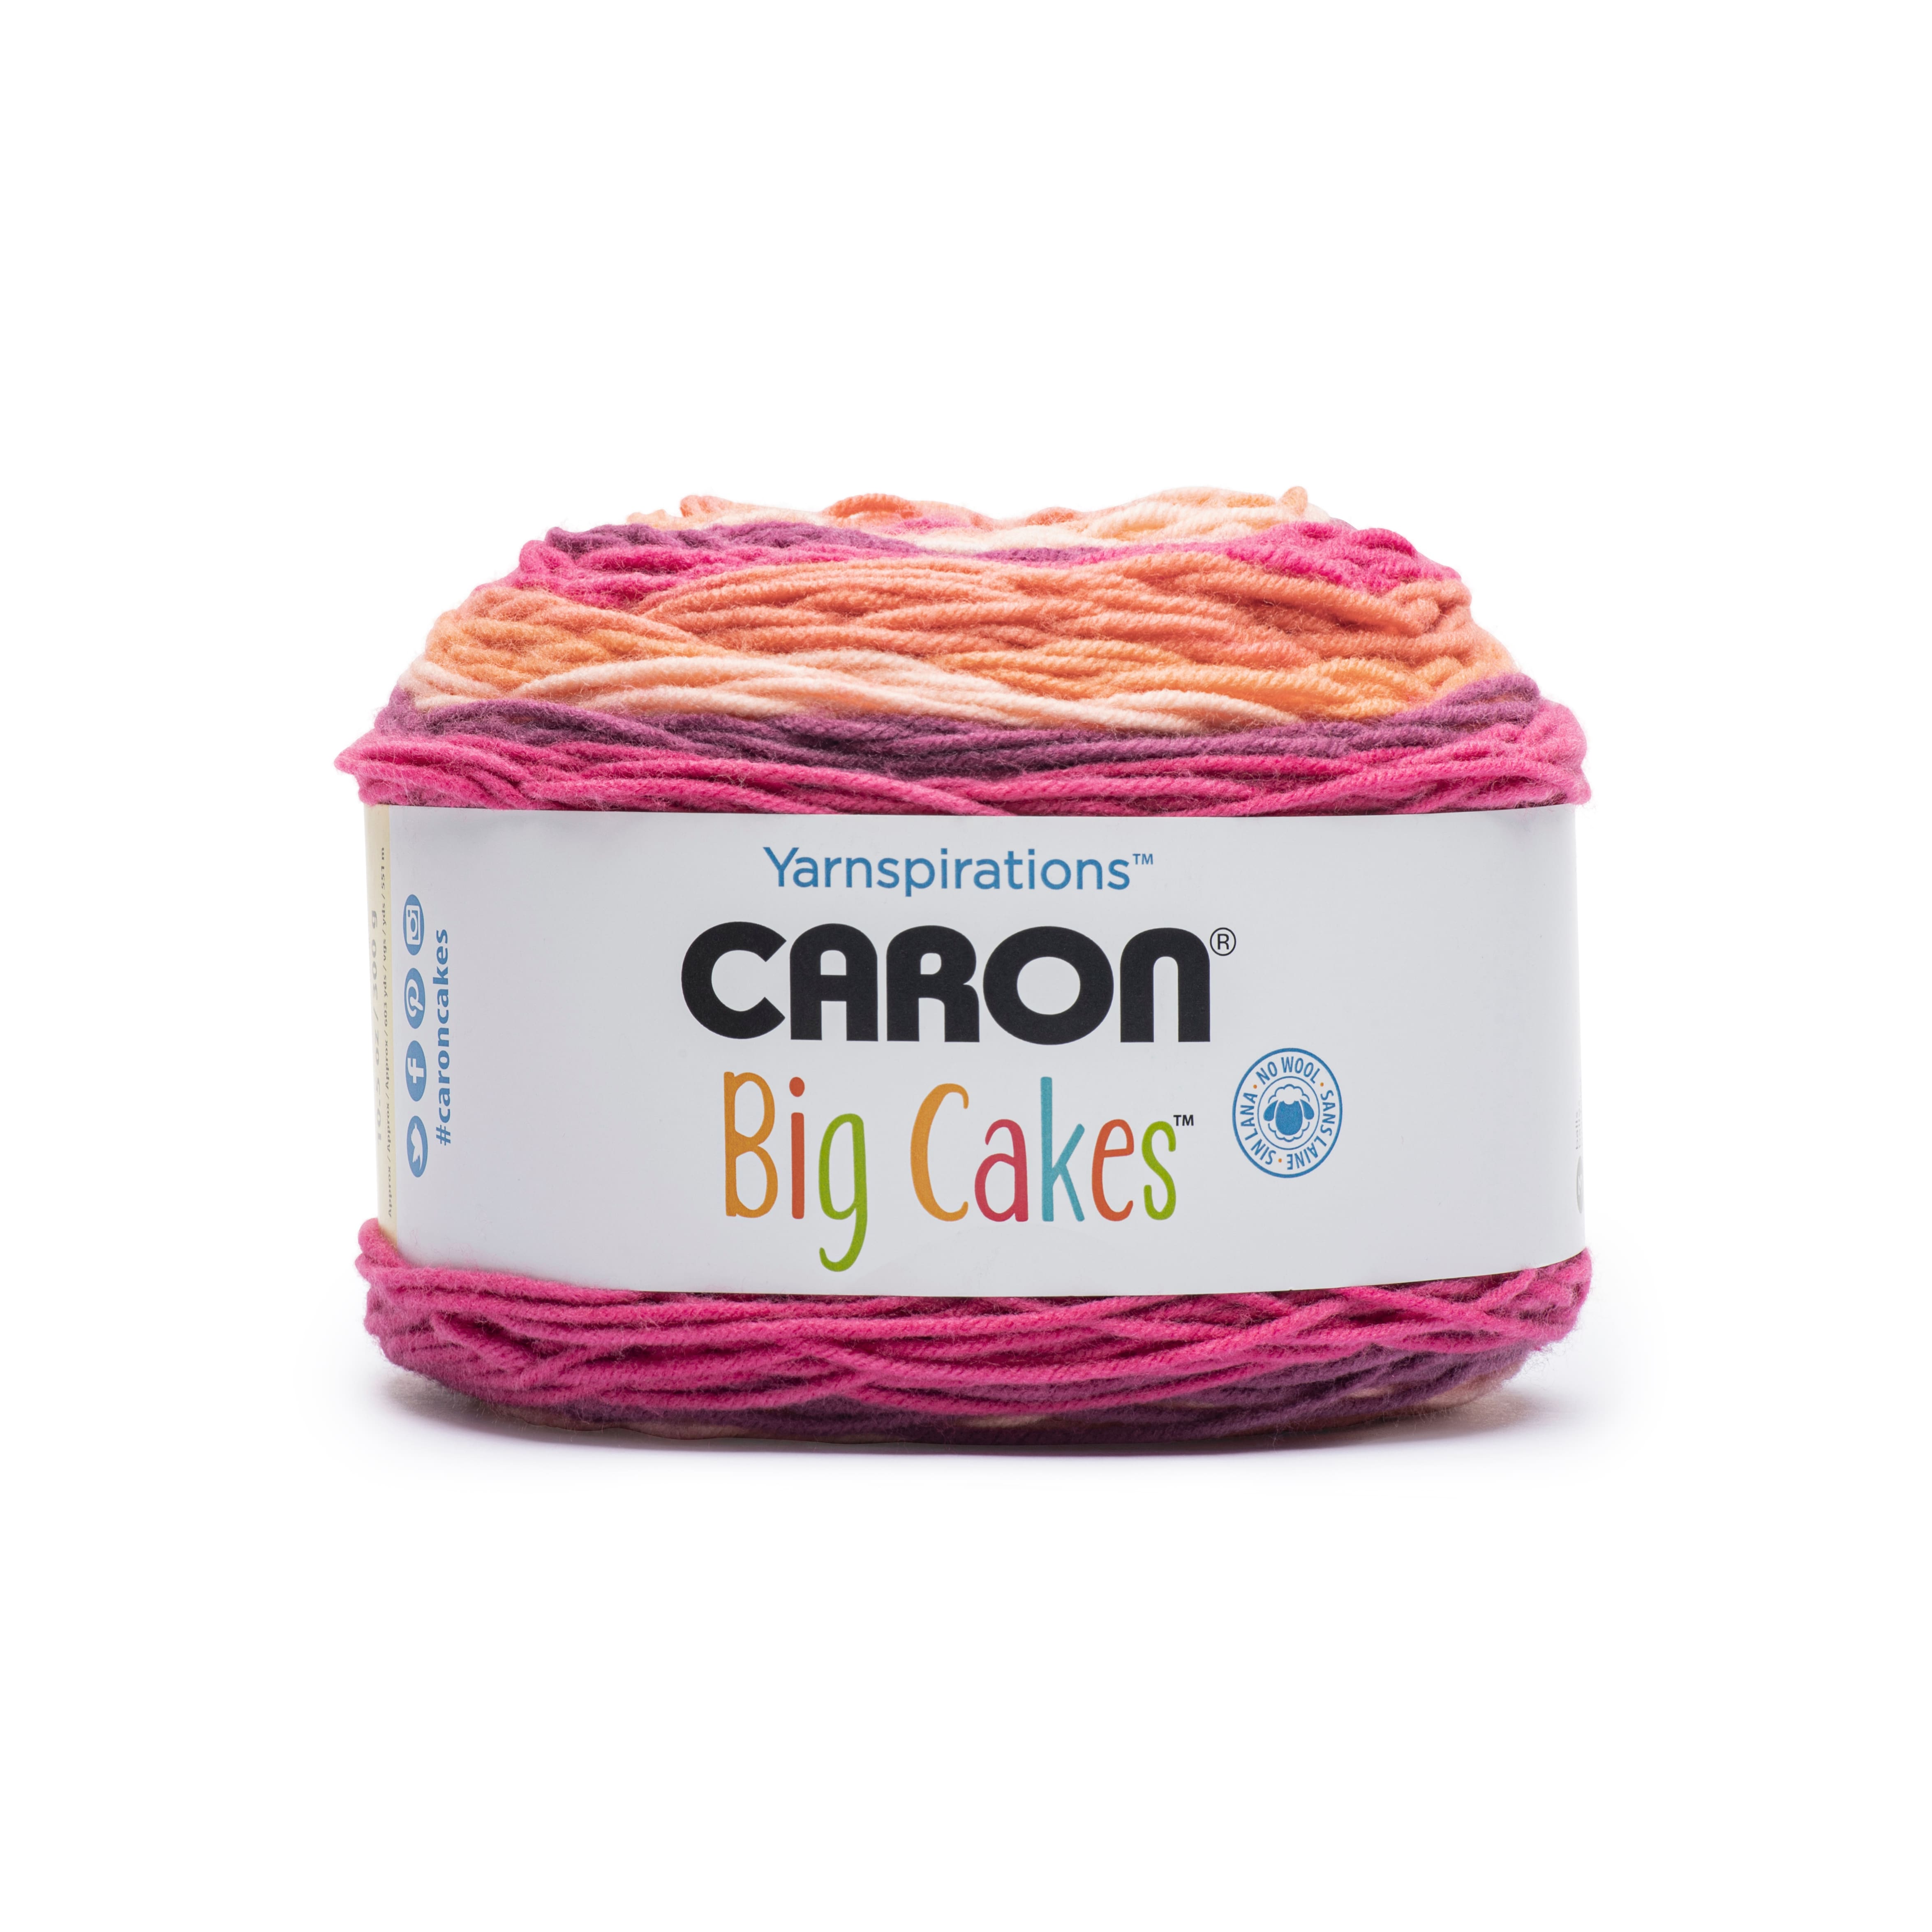  Big Cakes Yarn by Caron - Multicolor Yarn for Knitting,  Crochet, Weaving, Arts & Crafts - Toffee Brickle, Bulk 12 Pack